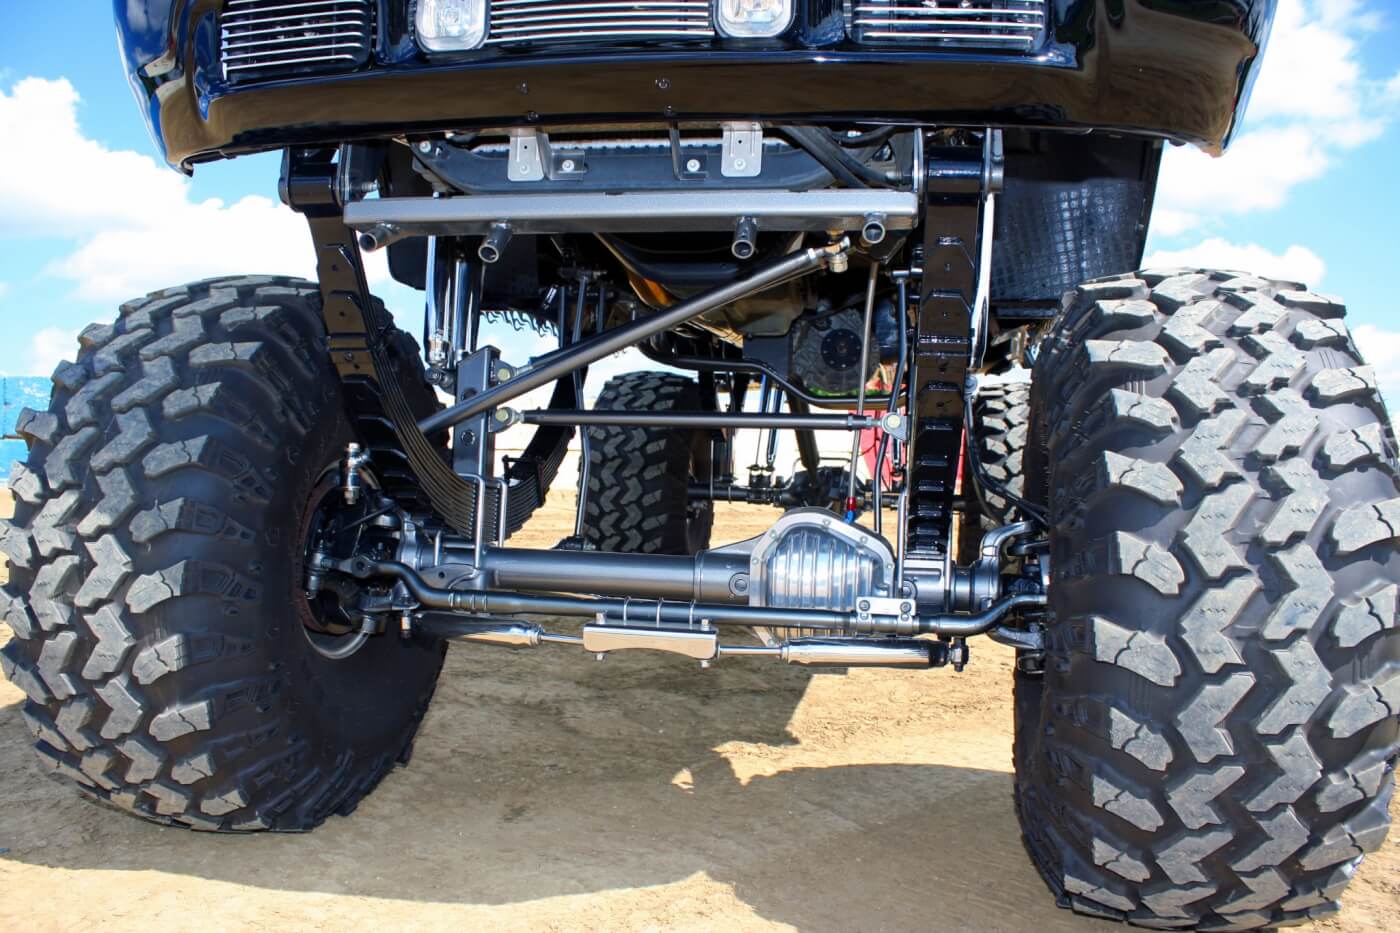 Up front, 24-inch lift springs from Atlas Spring provide the foundation for the lift. Steering is handled by an ORU crossover setup.